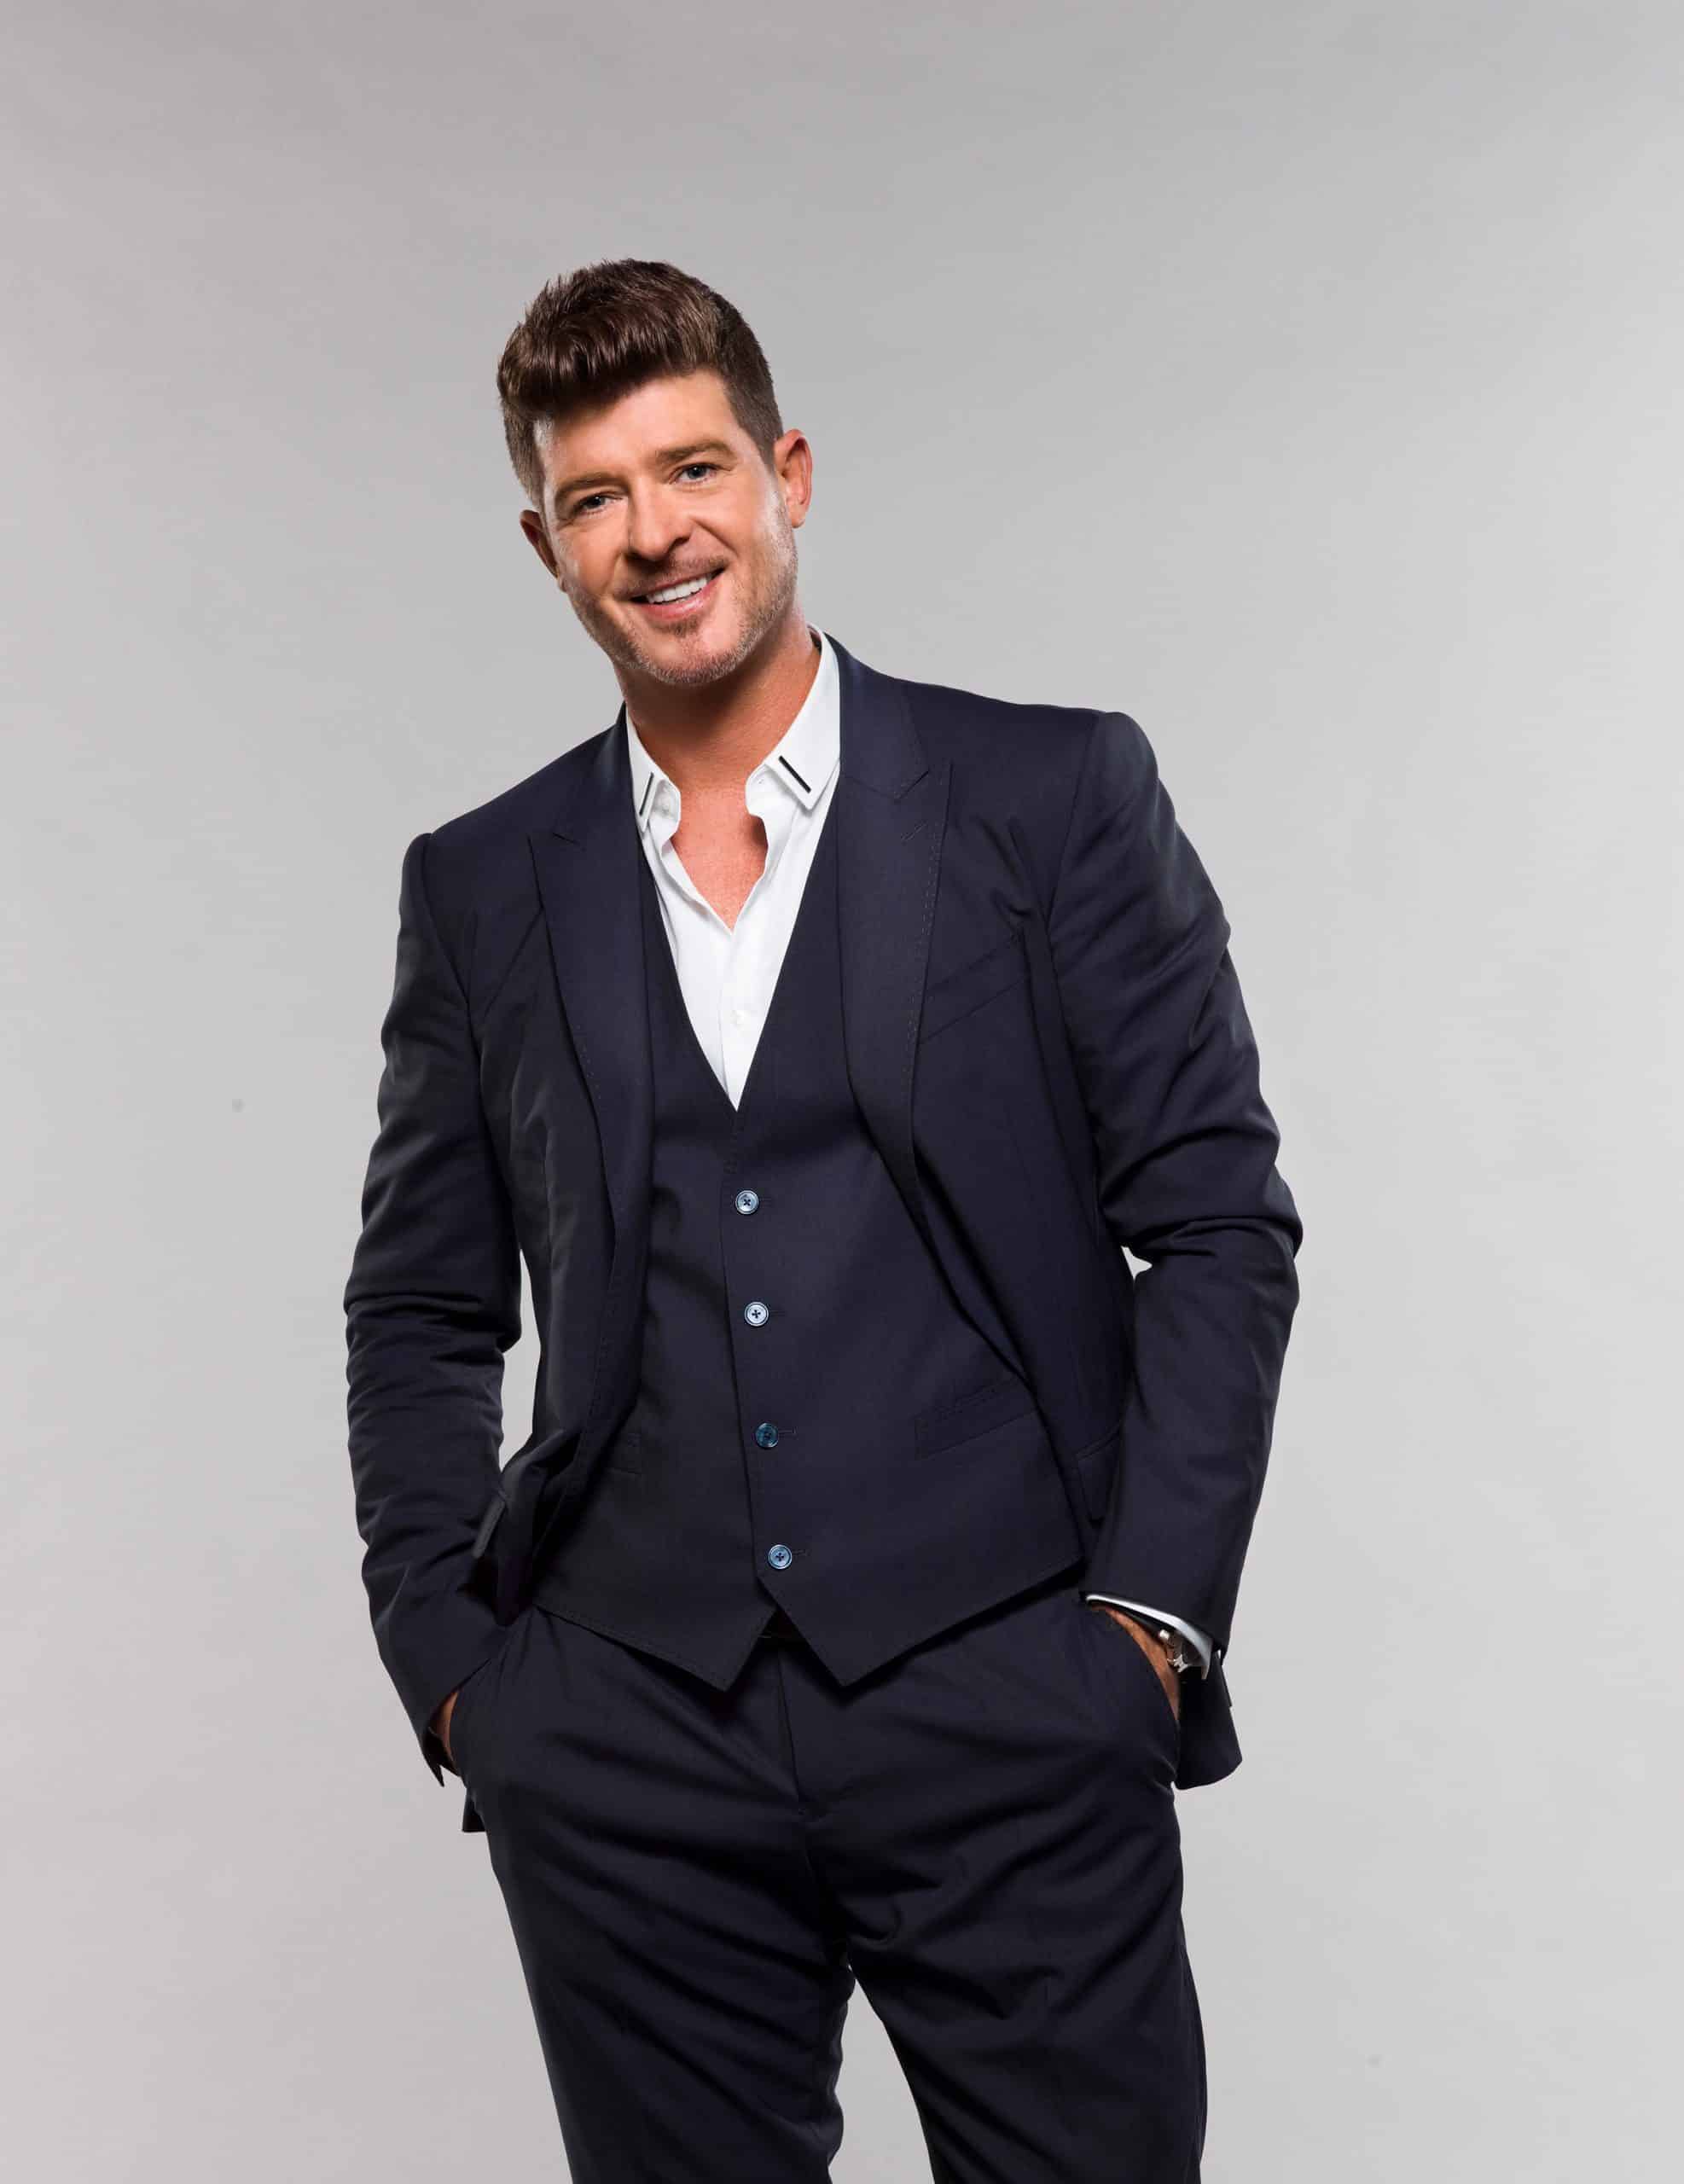 THE MASKED SINGER, Robin Thicke